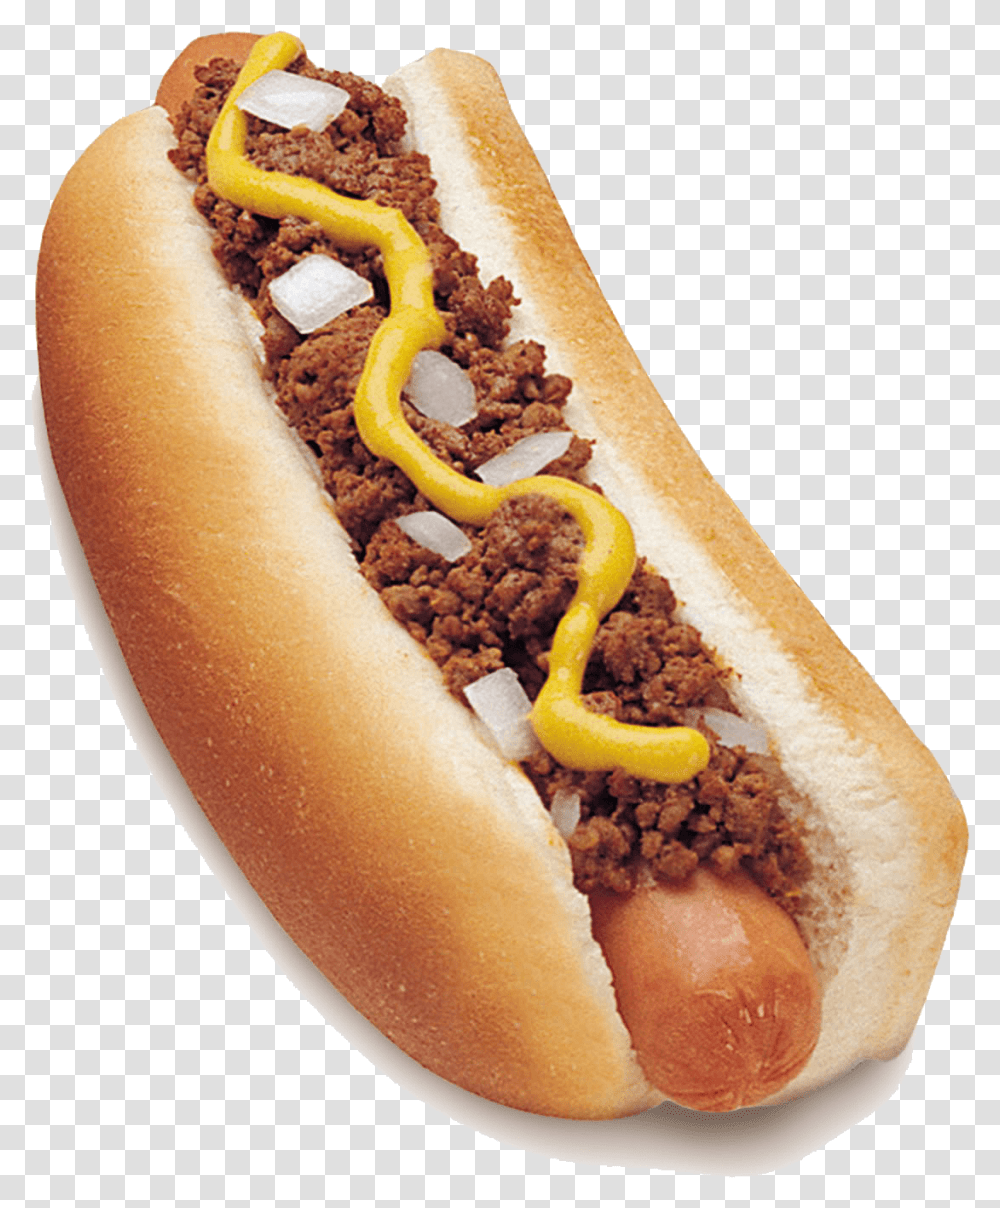 Hot Dog Clipart Processed Food Chili Dog Clip Art Transparent Png